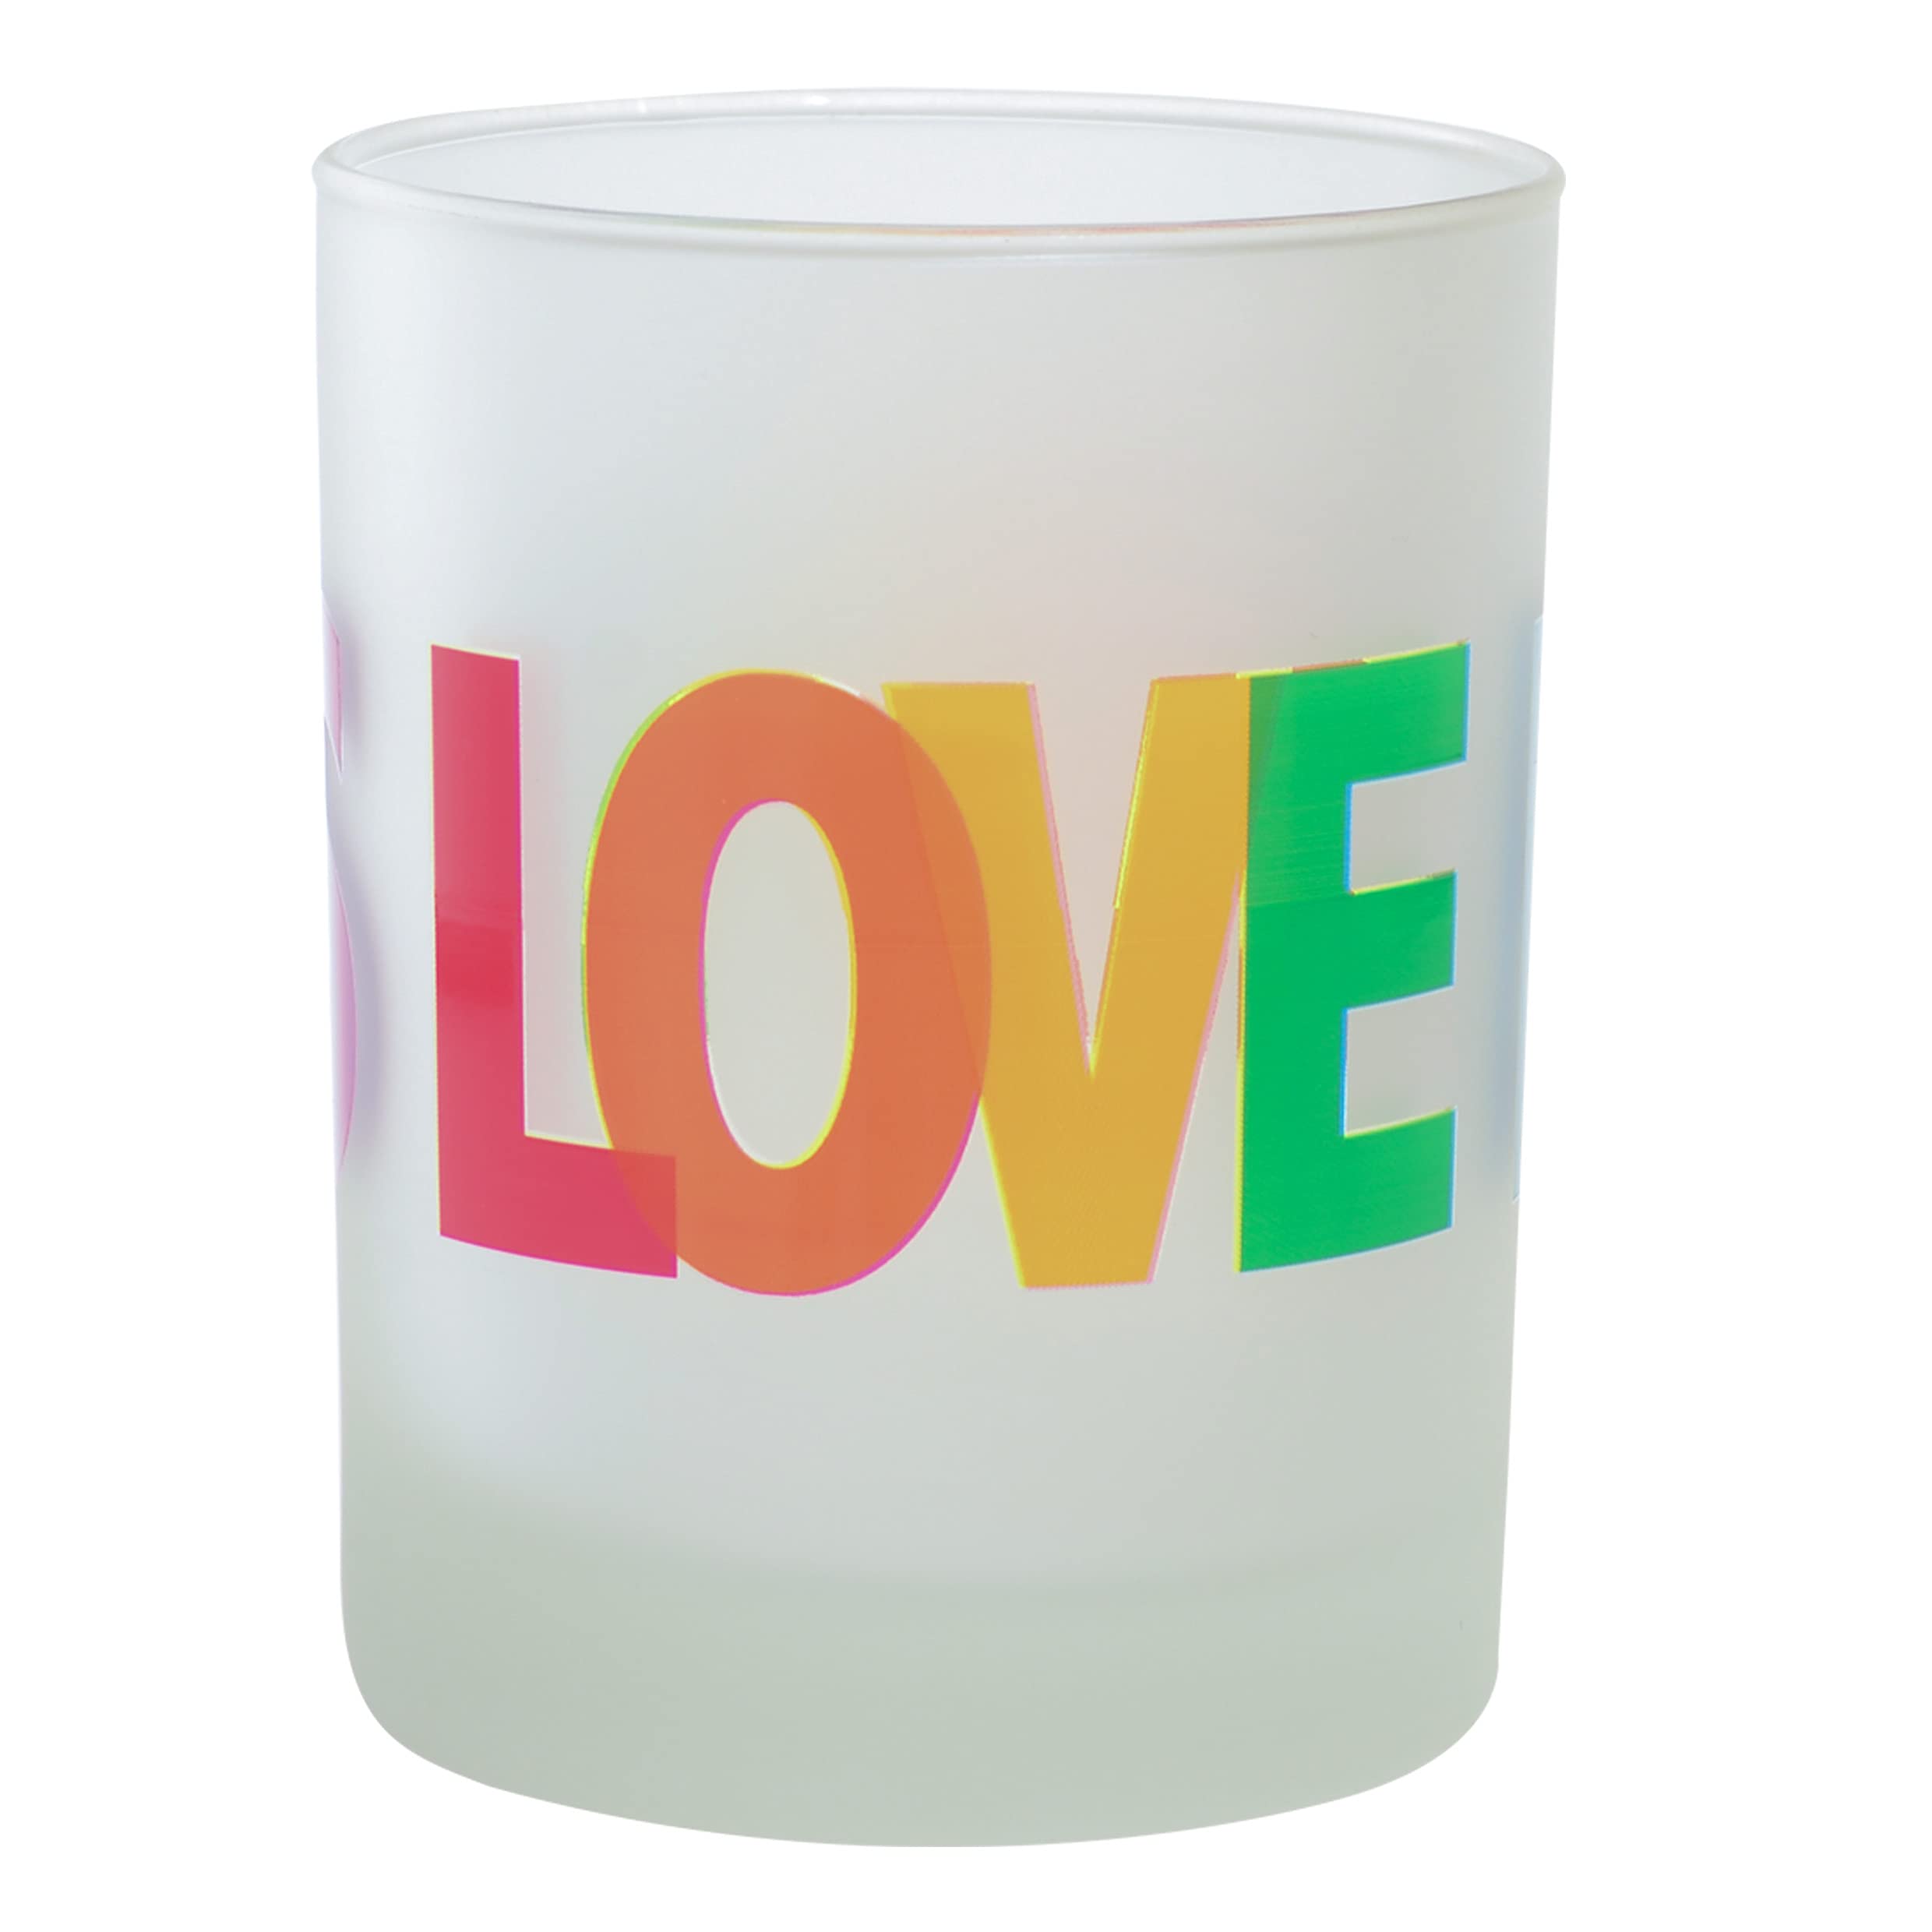 Culver Pride Decorated Frosted Double Old Fashioned Tumbler Glasses, 13.5-Ounce, Gift Boxed Set of 2 (Love Is Love)